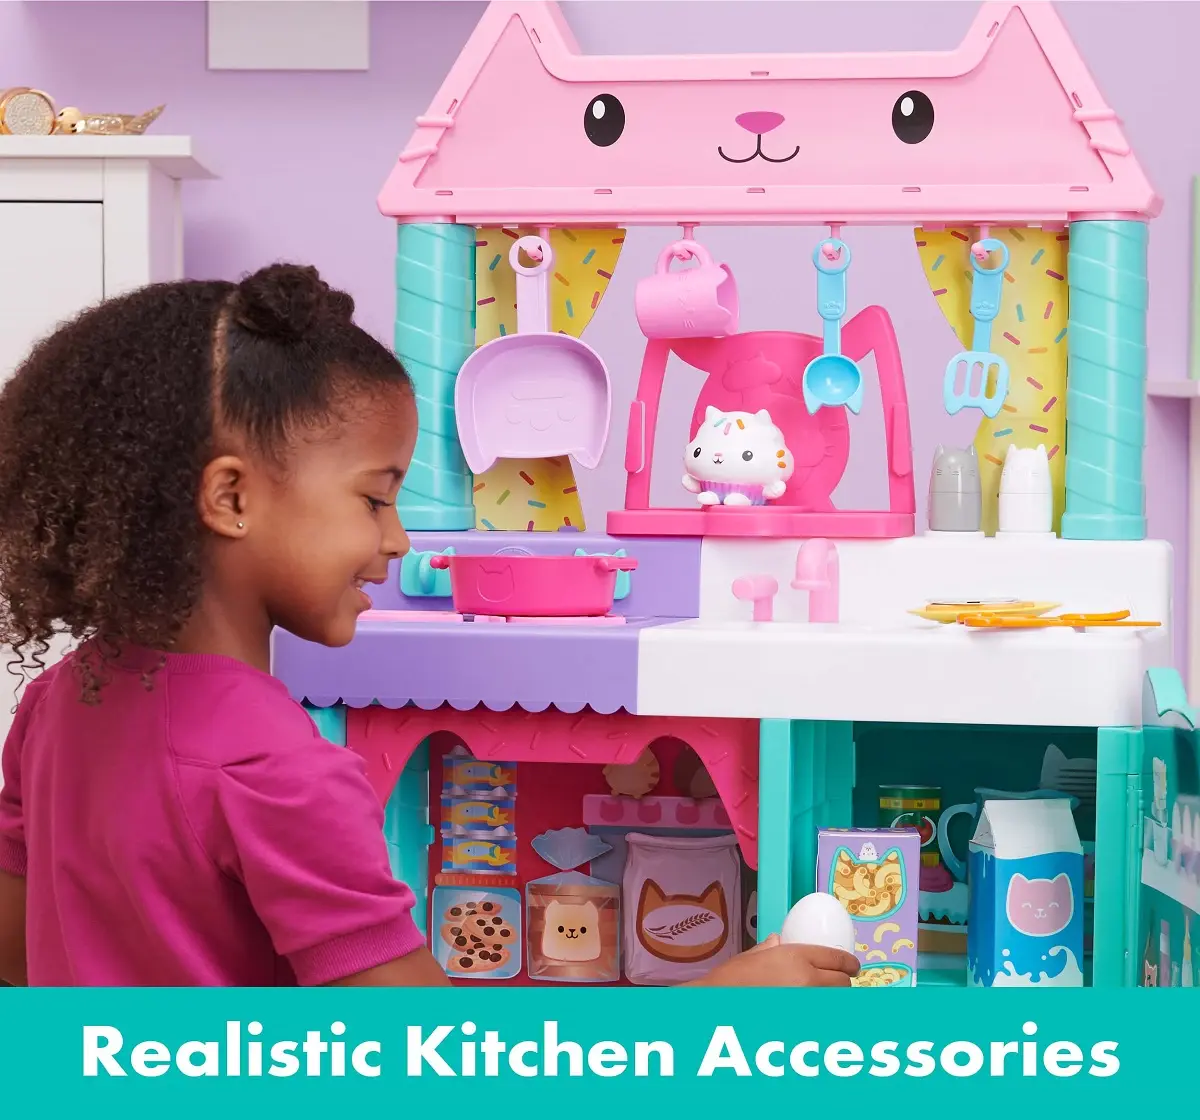 Gabbys Dollhouse, Cakey Kitchen Set for Kids with Play Kitchen Accessories, Play Food, Sounds, Music and Kids Toys for Girls and Boys Ages 3 and up